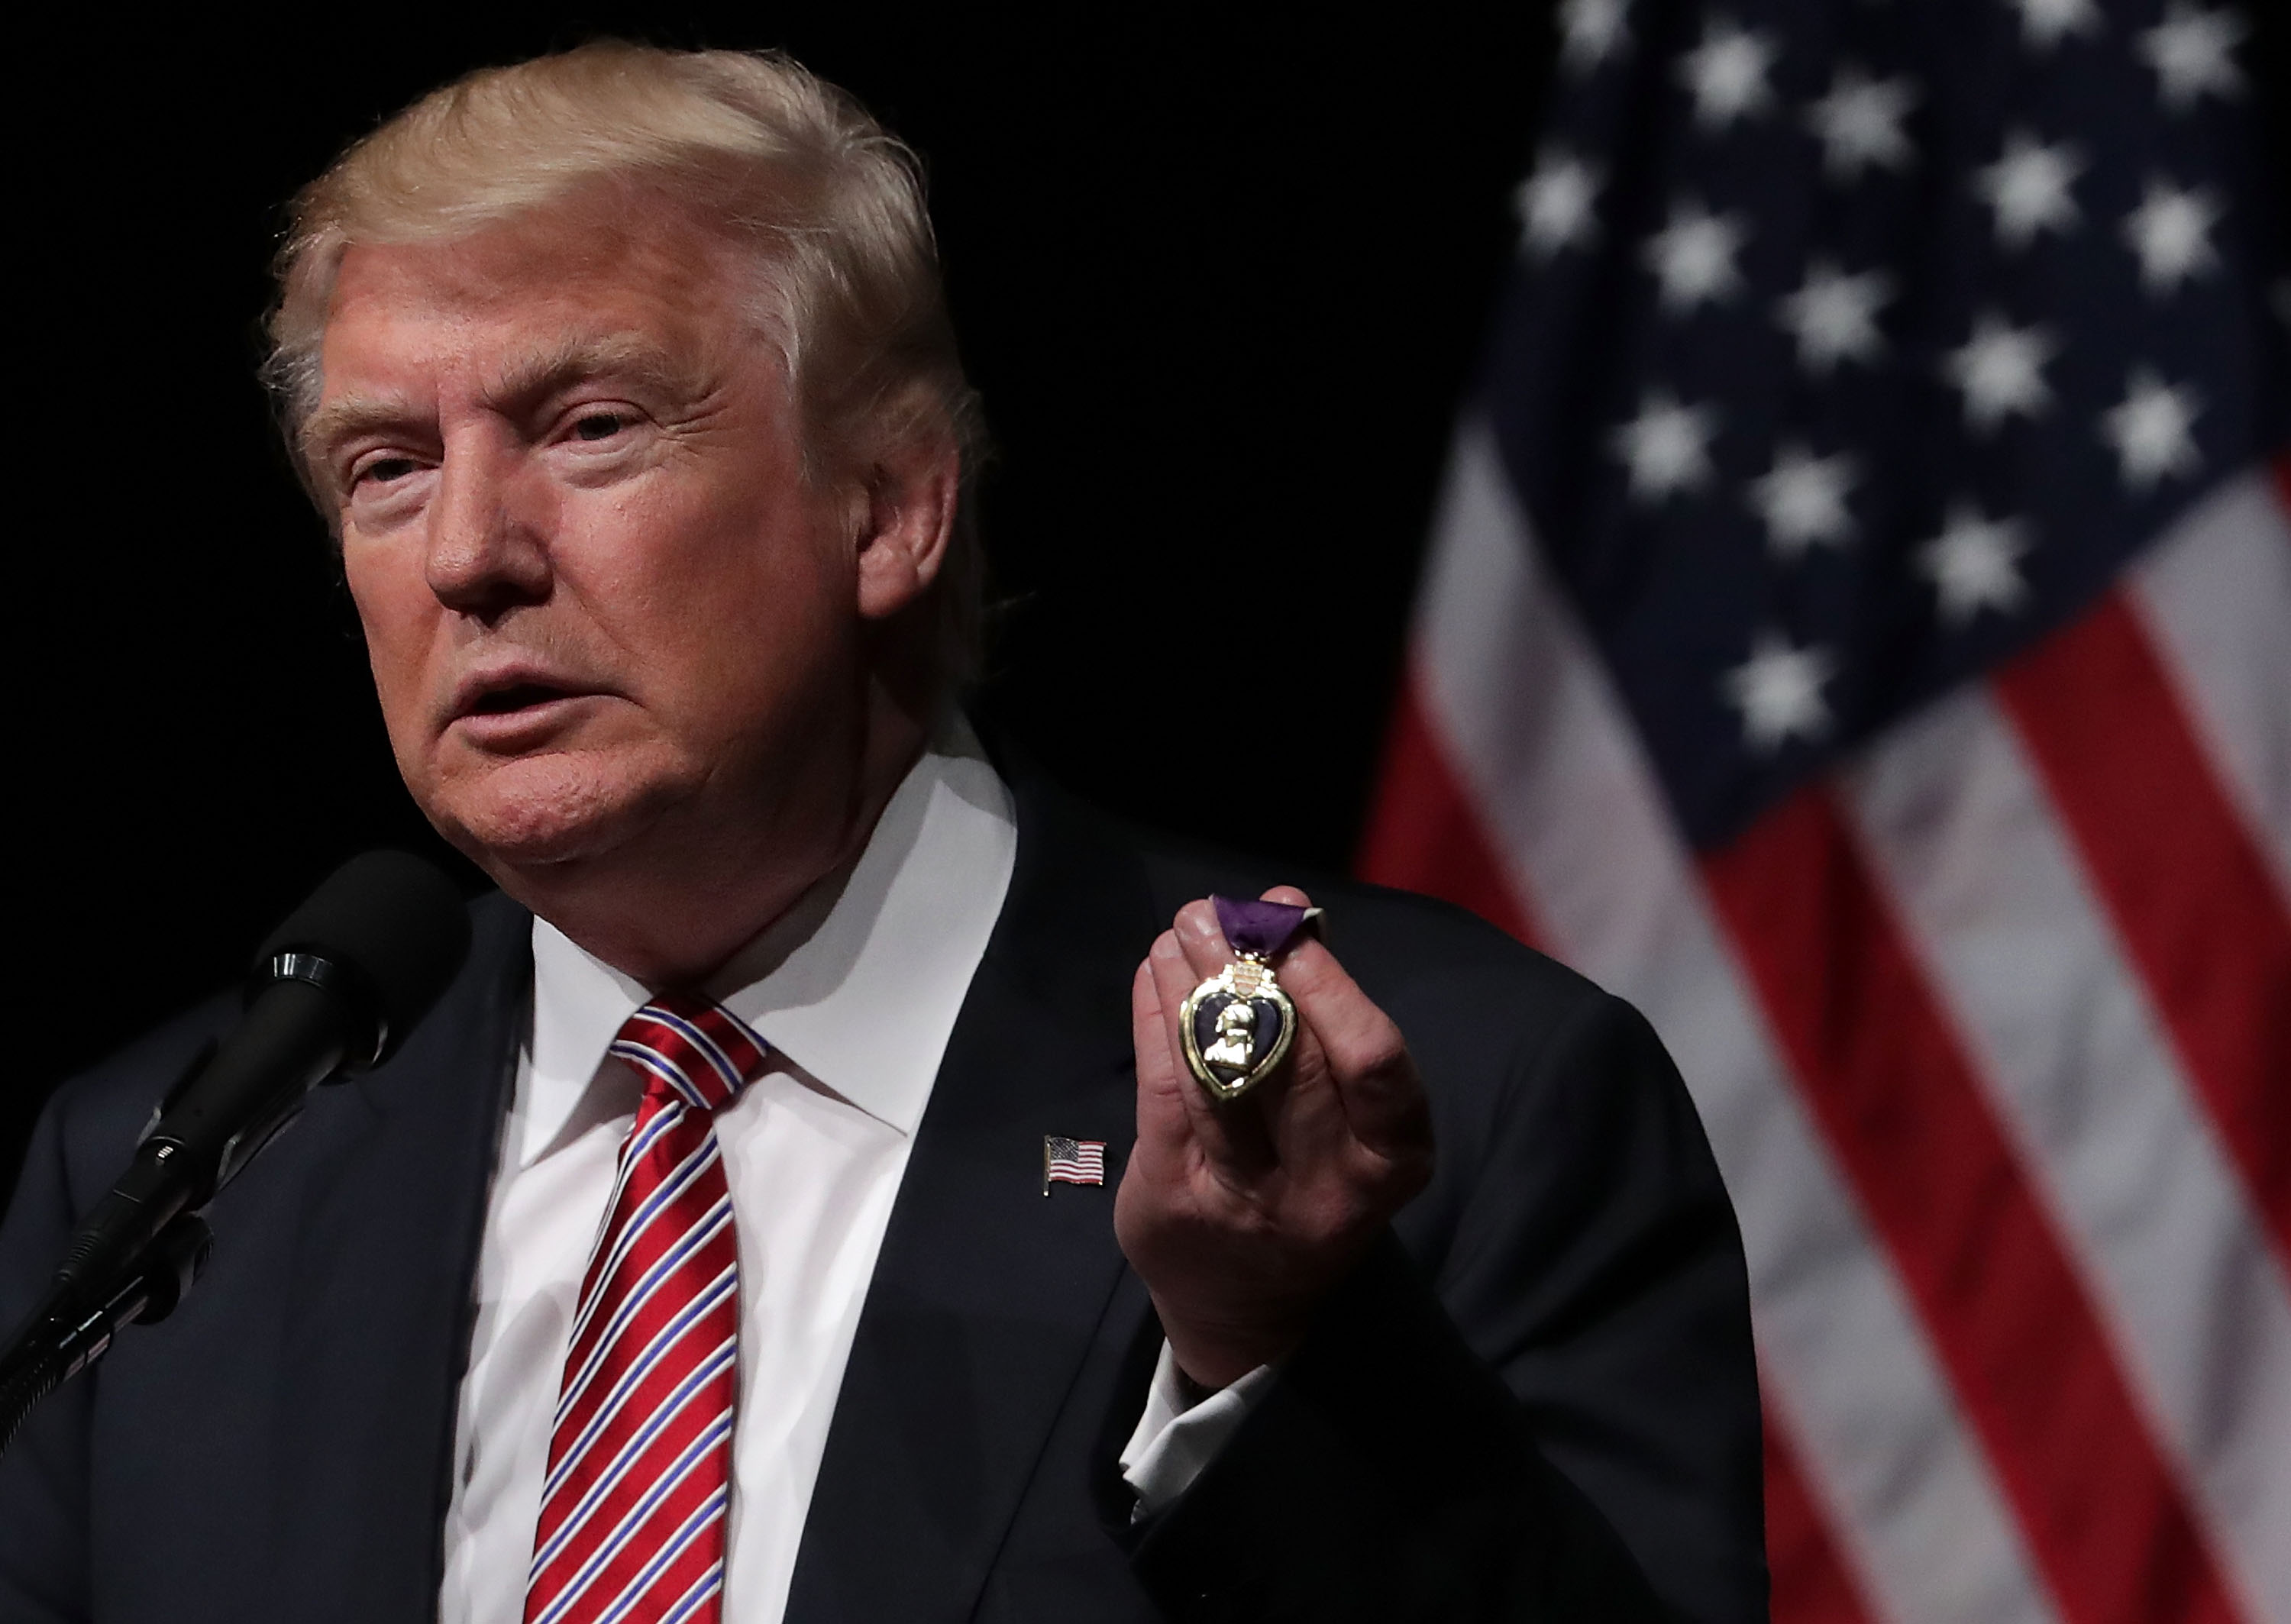 Republican presidential nominee Donald Trump holds a Purple Heart, given to him by veteran Louis Dorfman, during a campaign event at Briar Woods High School in Ashburn, Va., on Aug. 2, 2016. (Alex Wong—Getty Images)